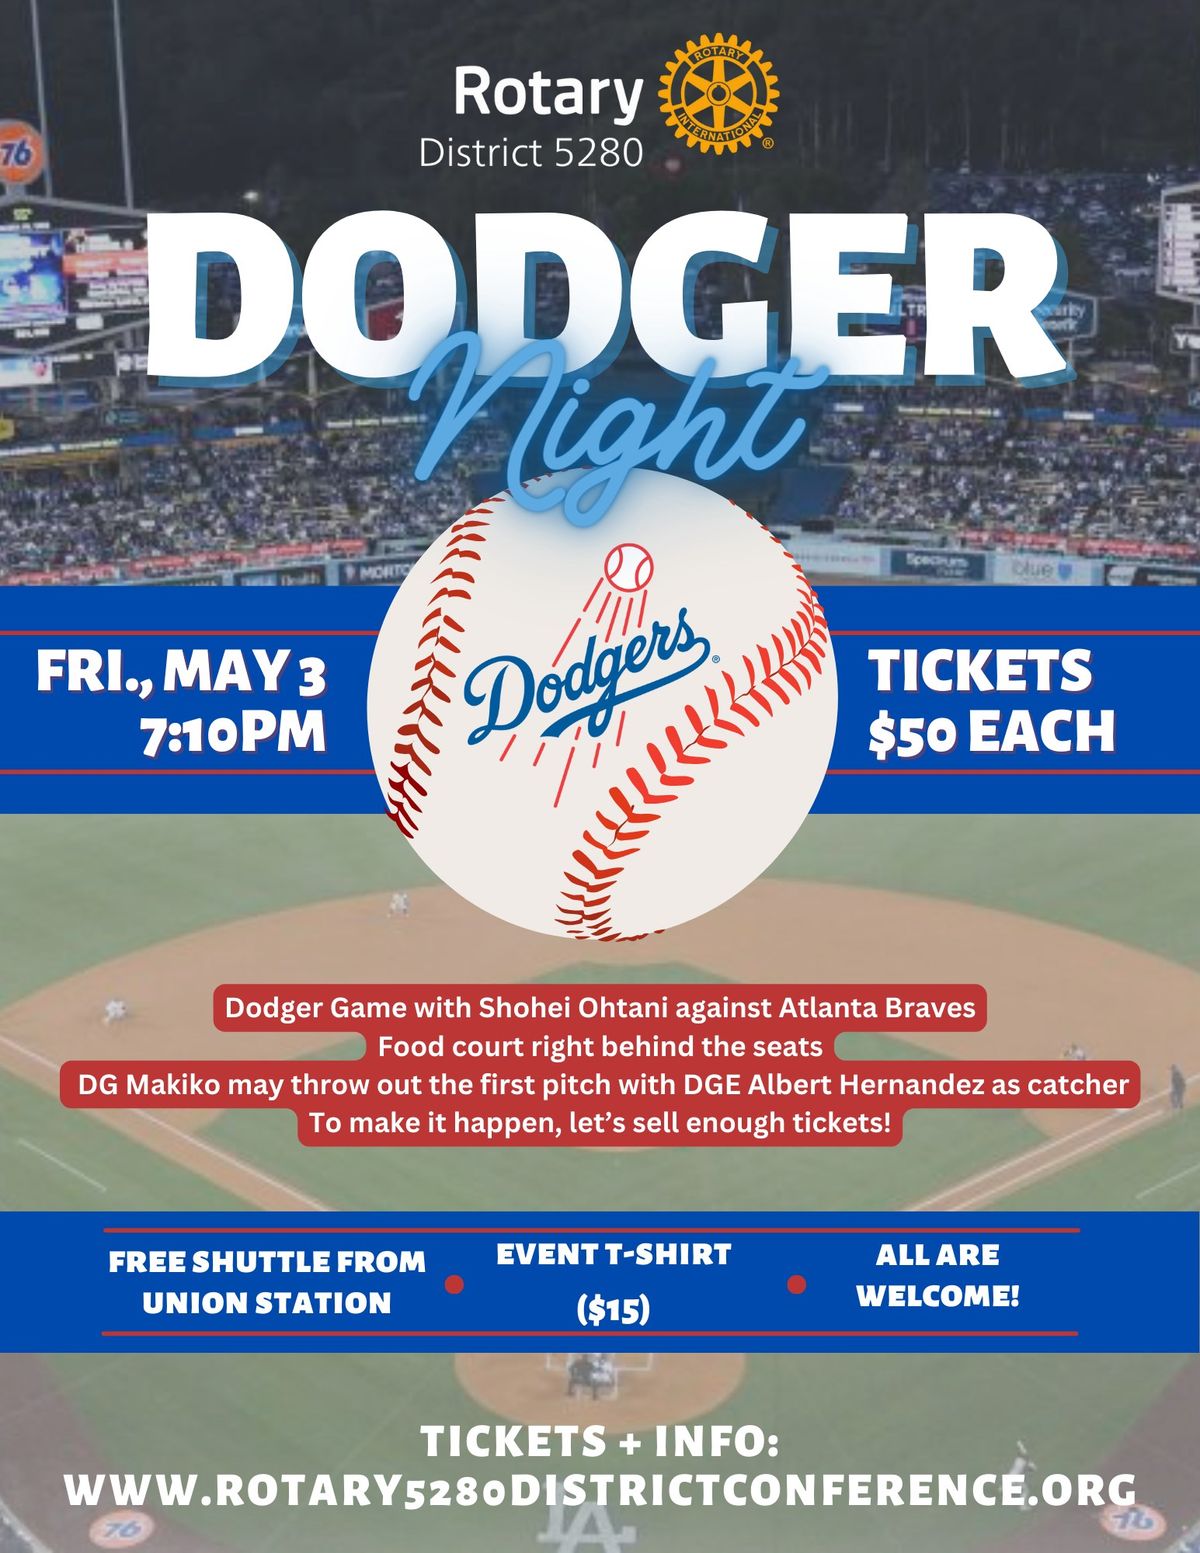 Rotary District 5280 Dodger Night!